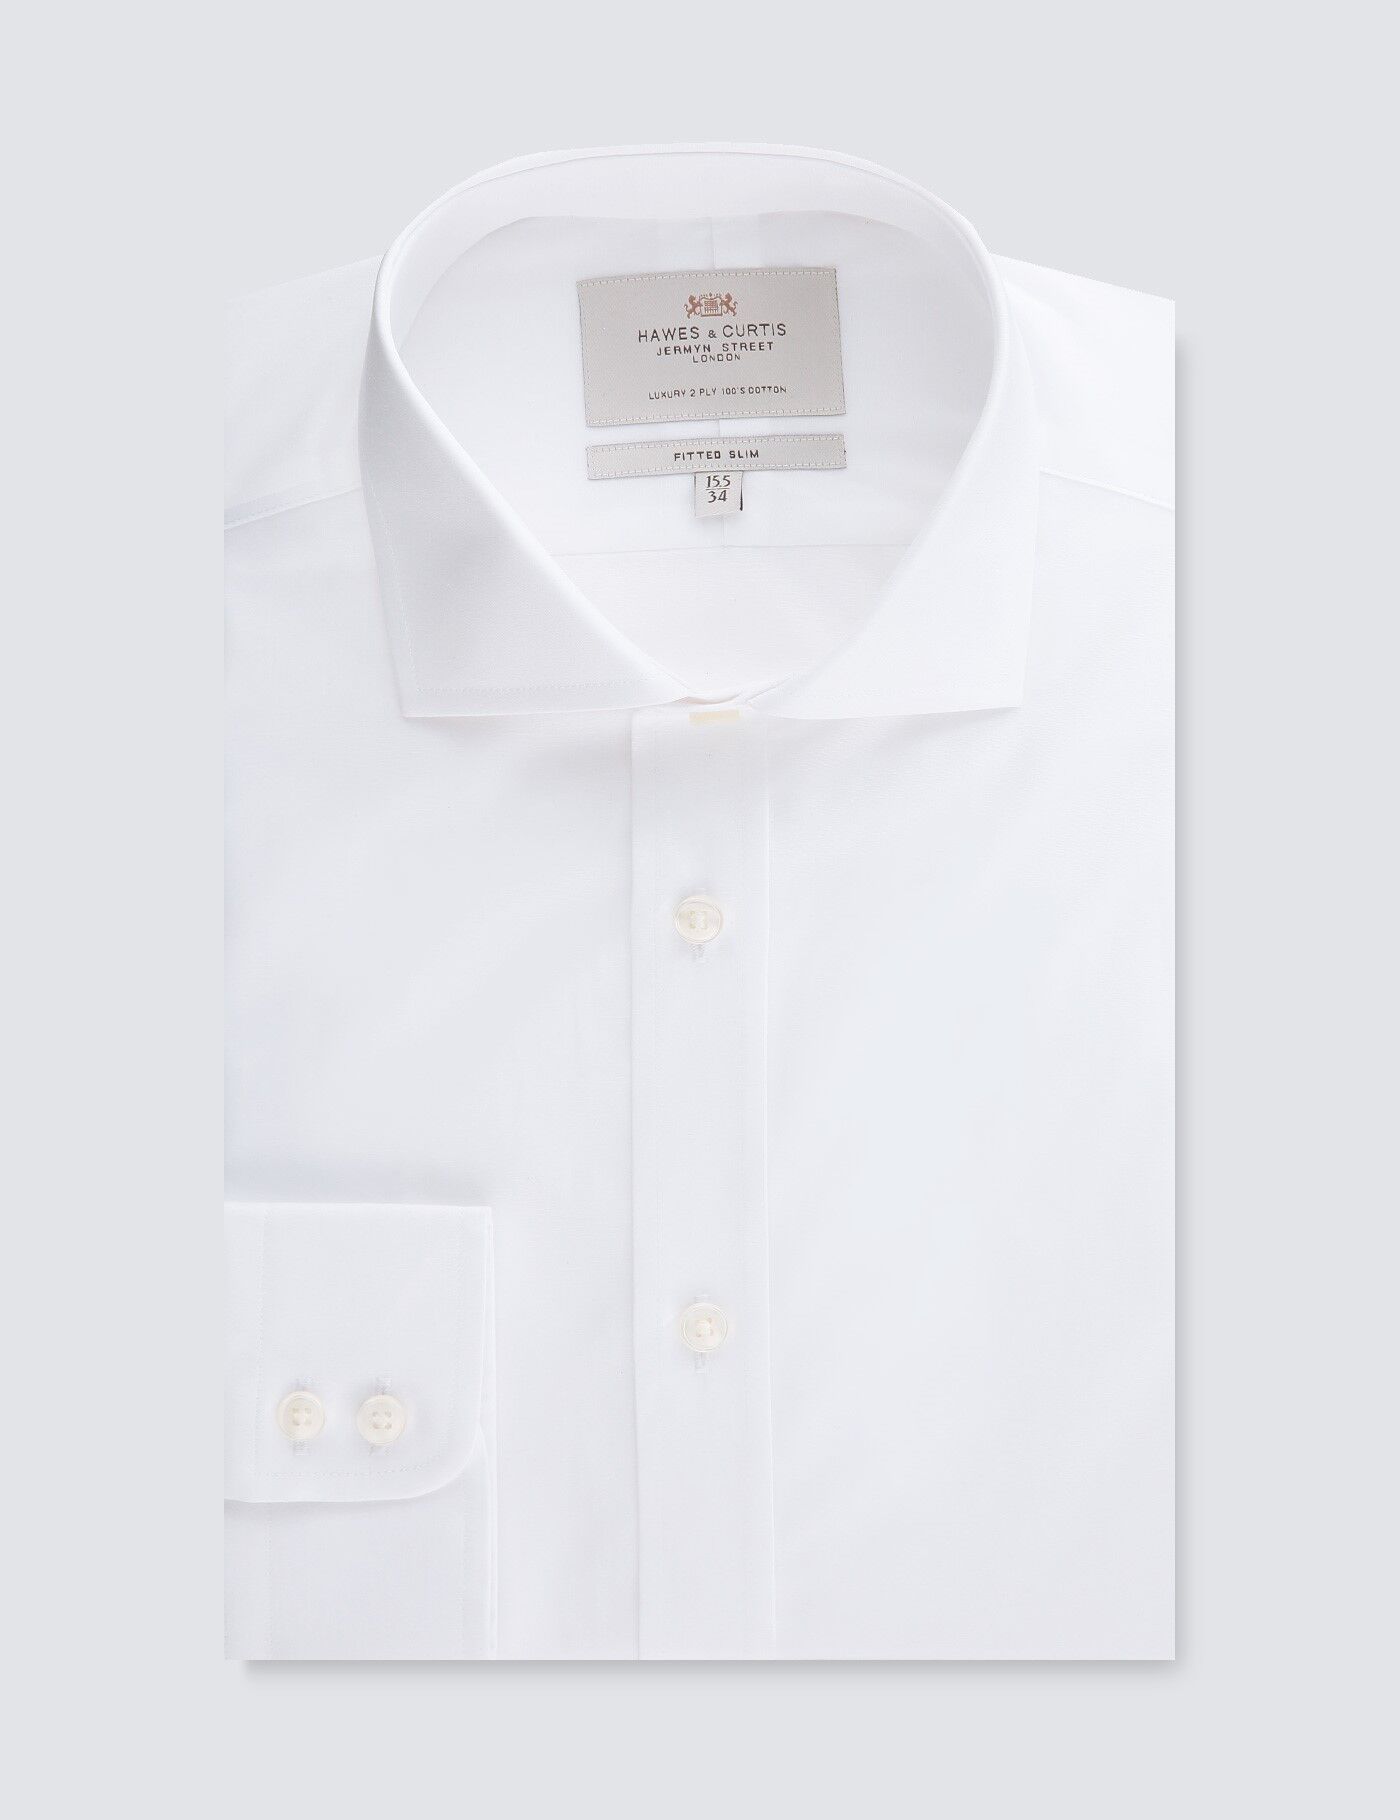 Hawes & Curtis Men's Business Formal Poplin Fitted Slim Dress Shirt in White   Size 15.5/35   Windsor Collar   Single Cuff   Easy Iron